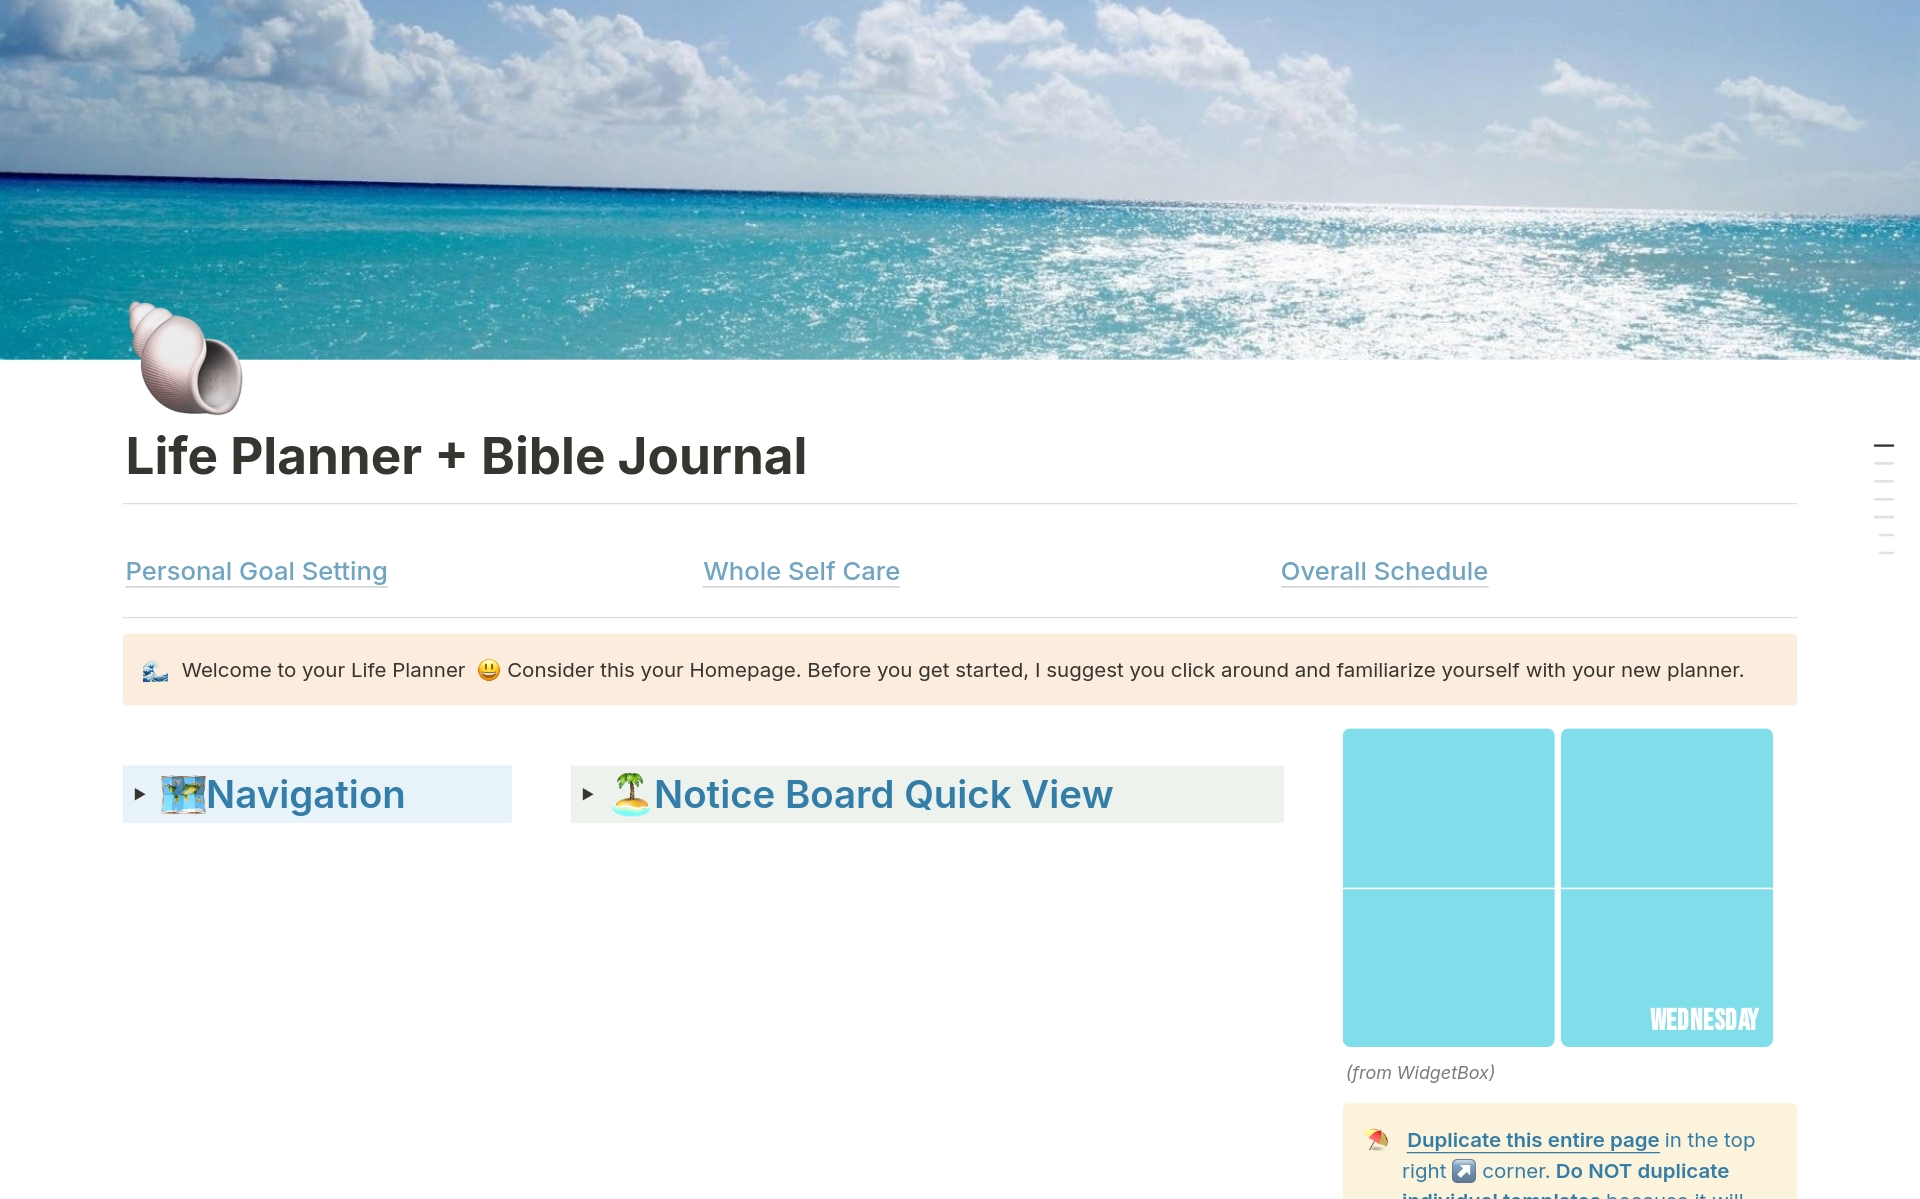 The Life Planner + Bible journal has the same heftiness & aesthetic features as the Life Planner, but with an added bonus of a Bible journal & bookmarked link to the Strong's Concordance.